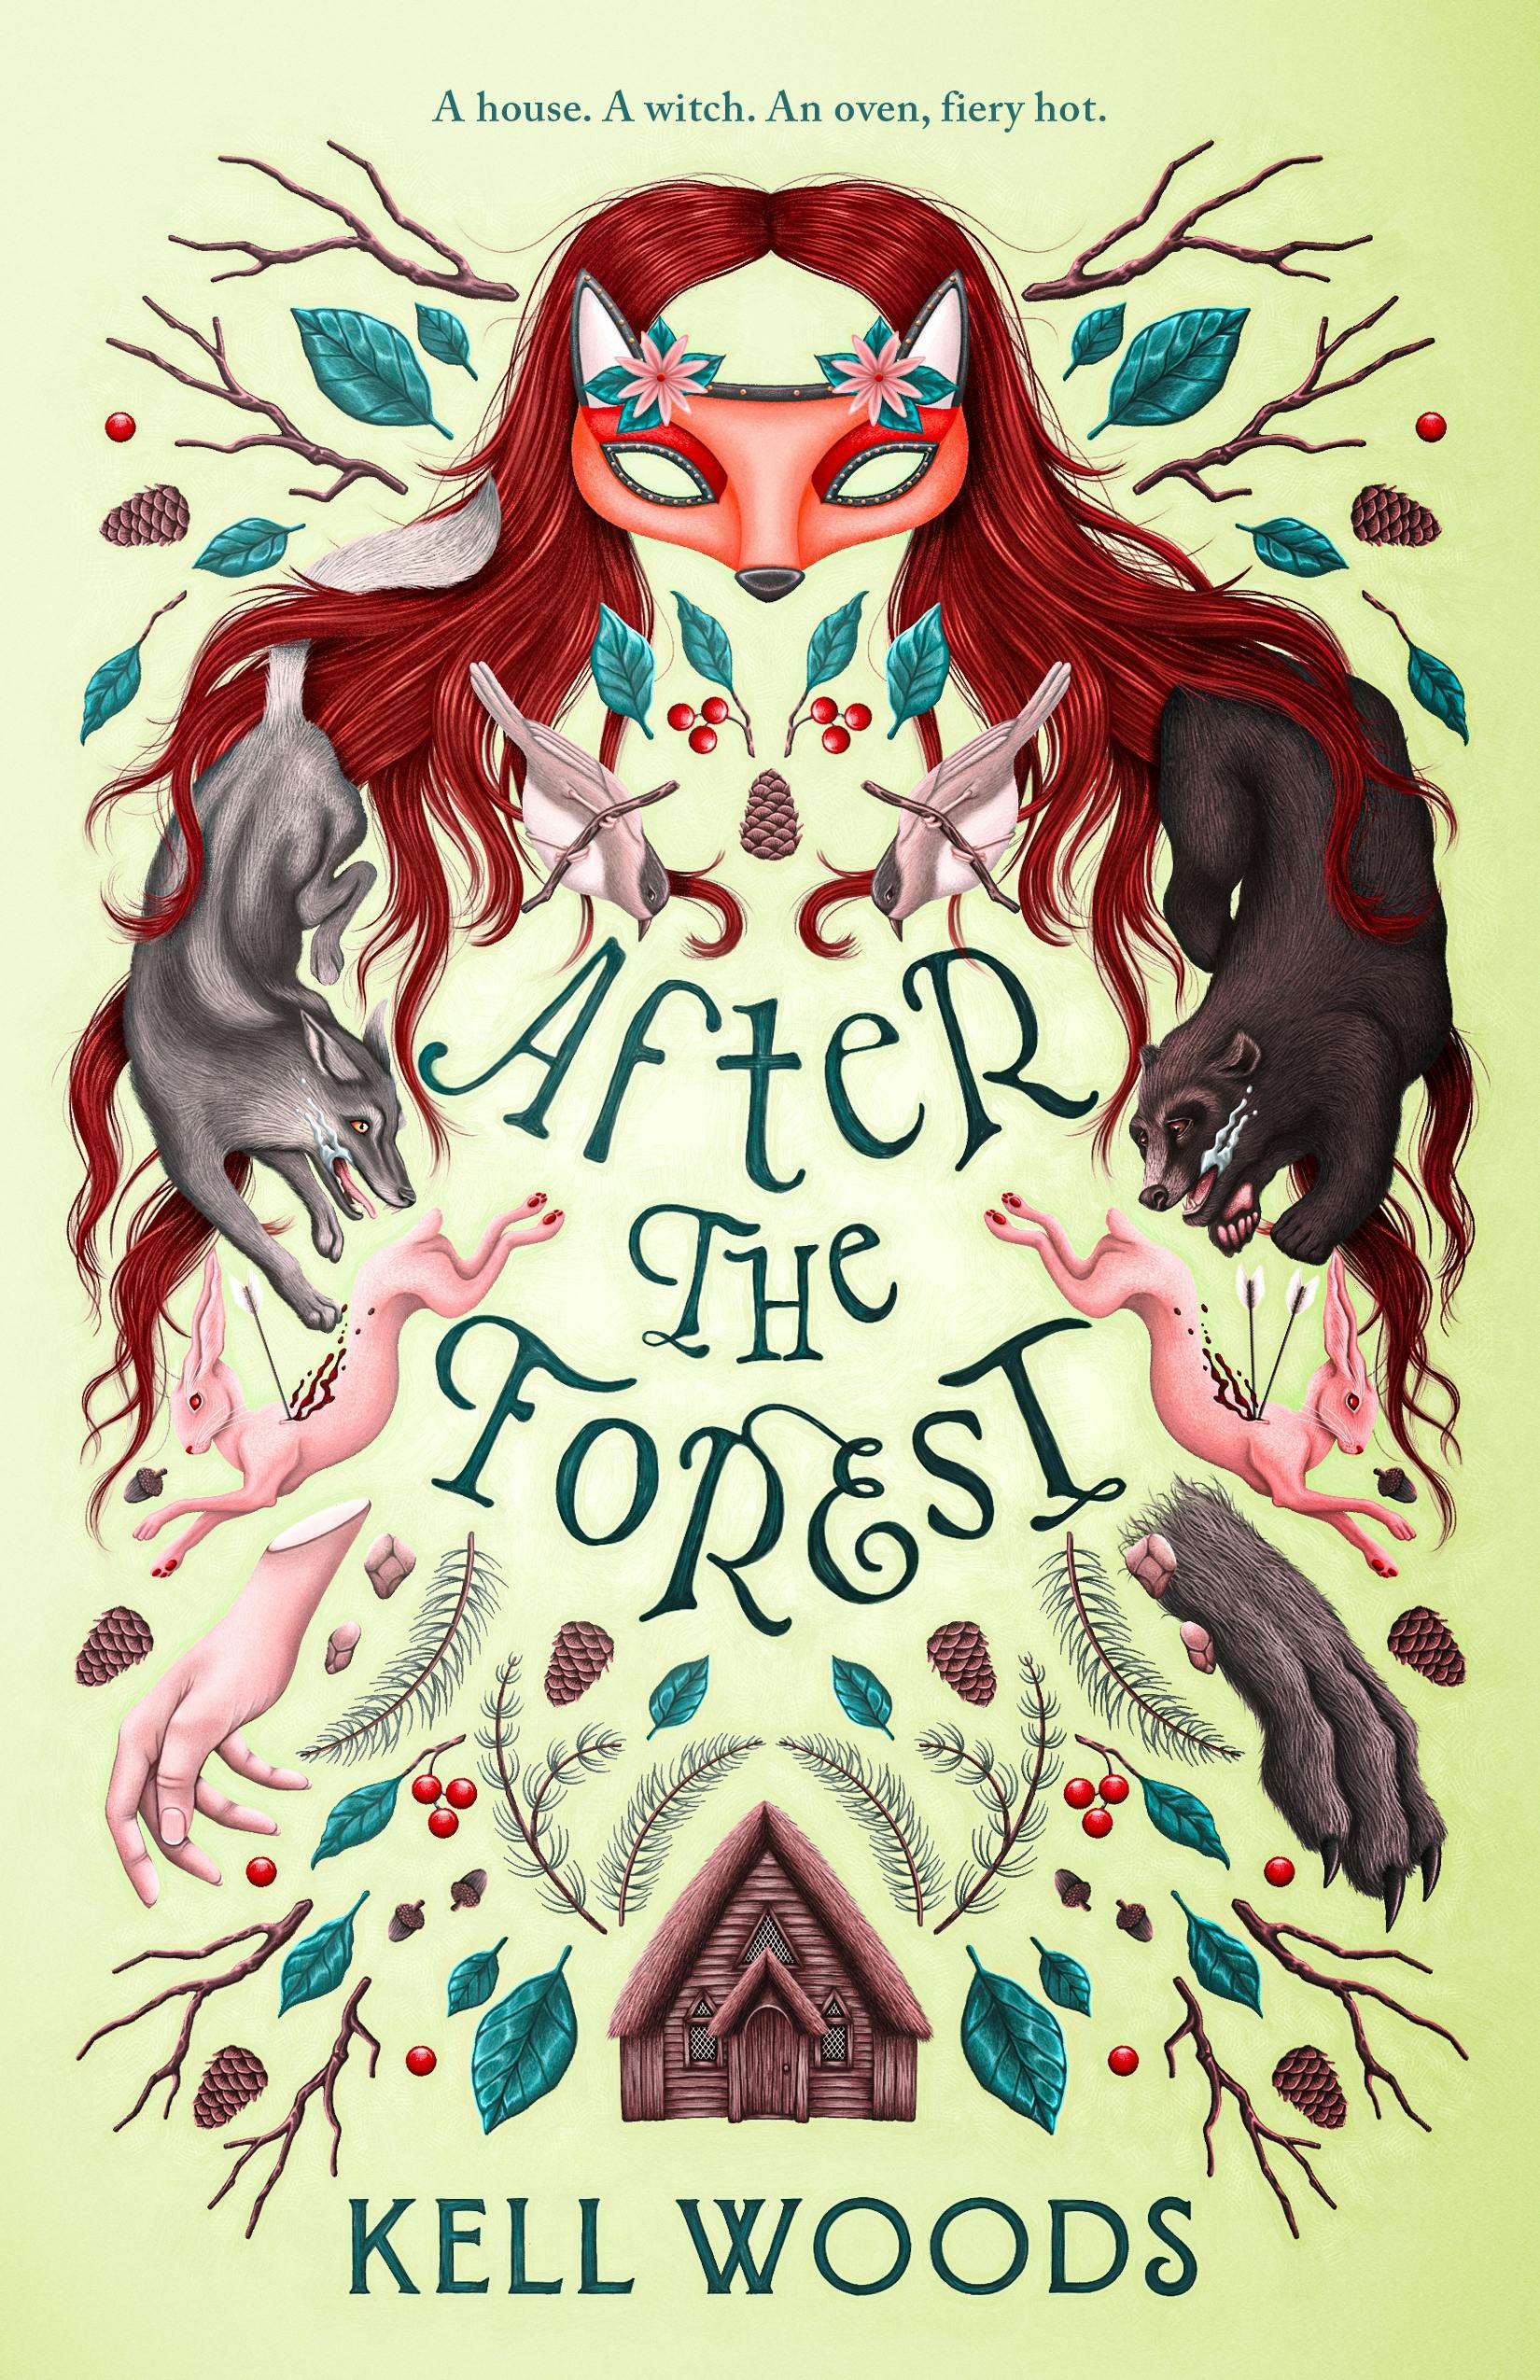 Cover for the book titled as: After the Forest